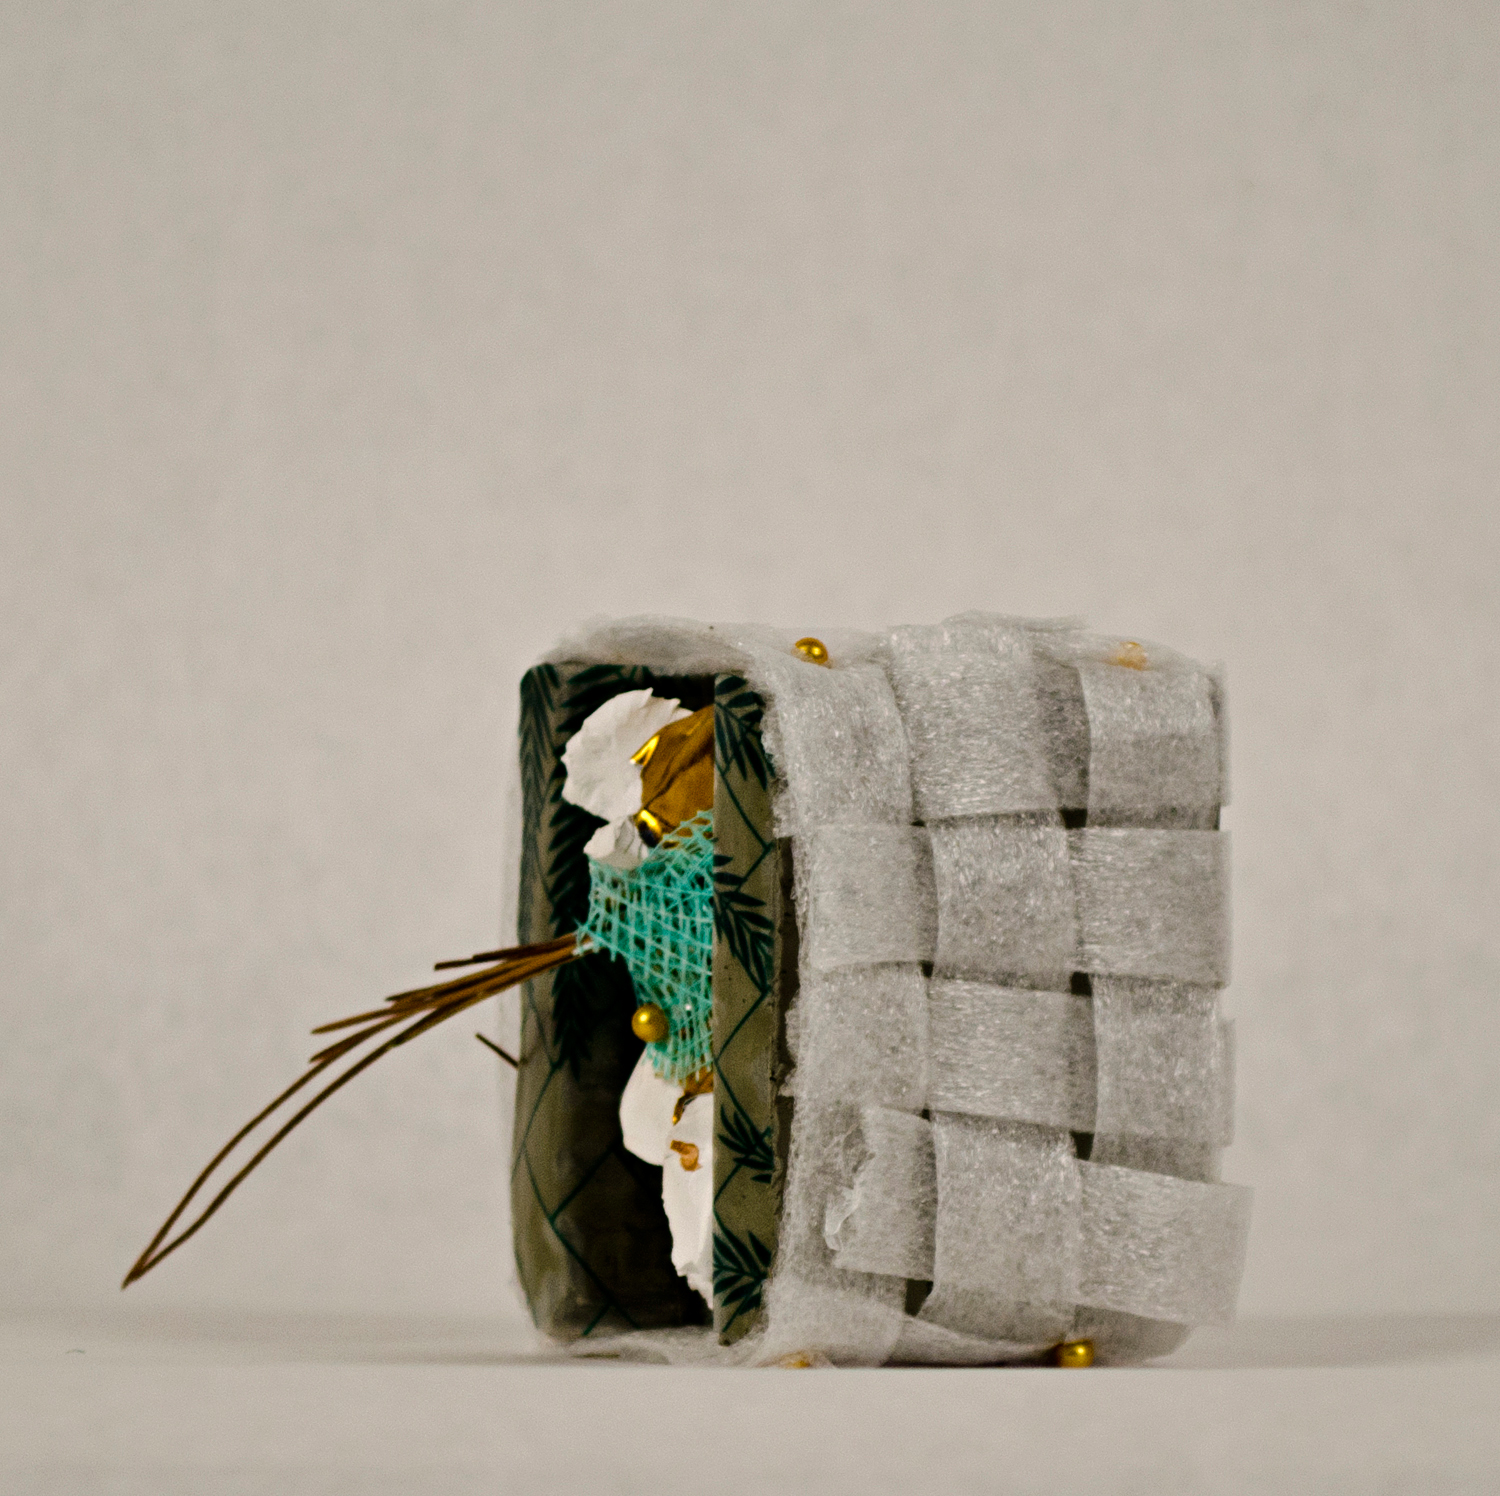 Jessica Lund, sushi, 2014. Paint, clay, foam, drywall tape, pine needles, pin, 4 x 3 x 2 in.